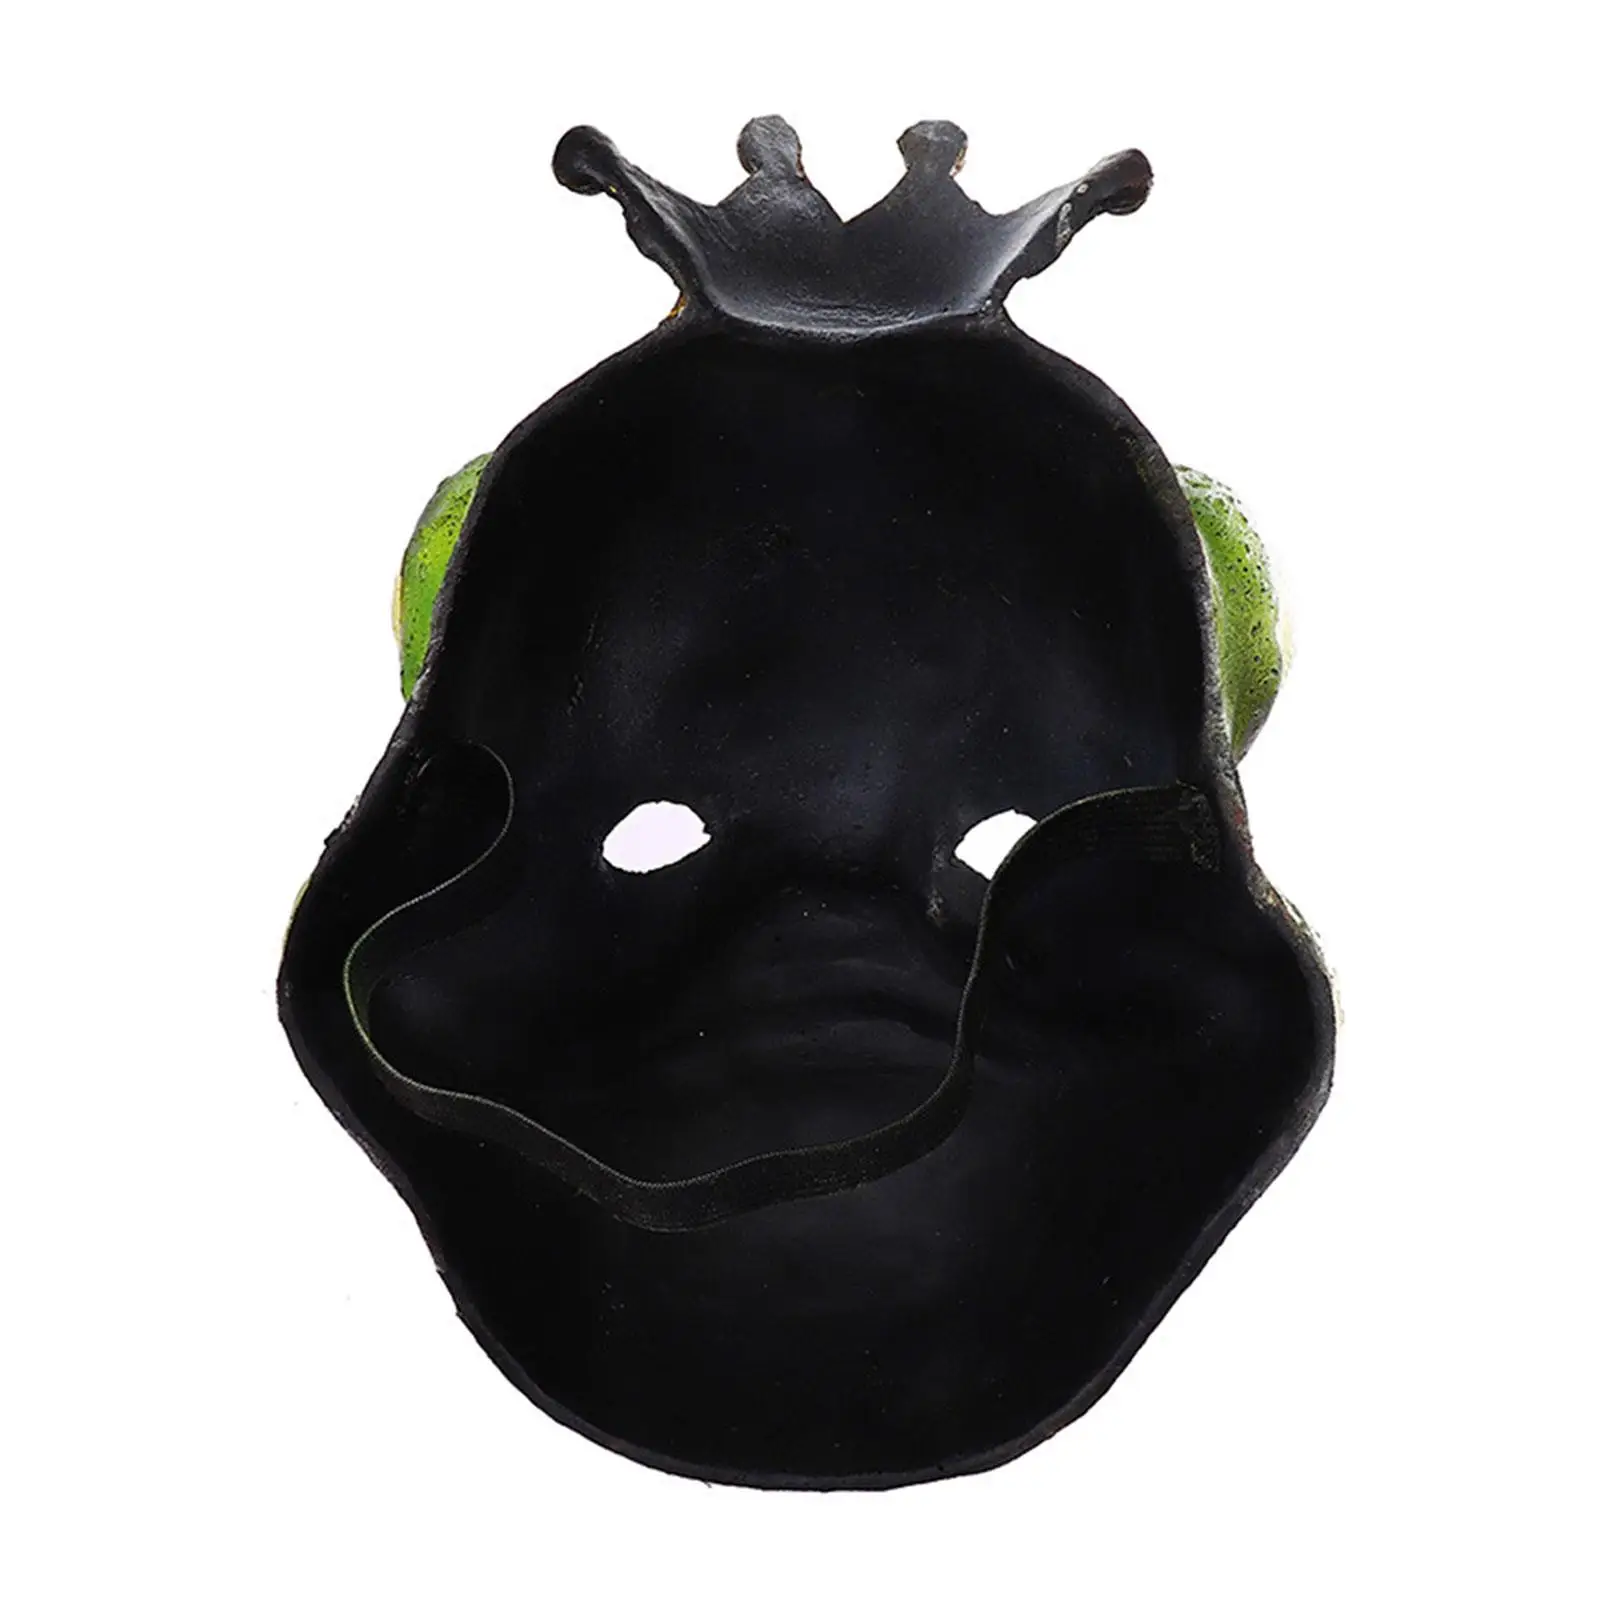 Frog Mask Cosplay Costume Props Novelty Face Cover Full Face Mask Animal Mask for Carnival Halloween Birthday Party Night Club